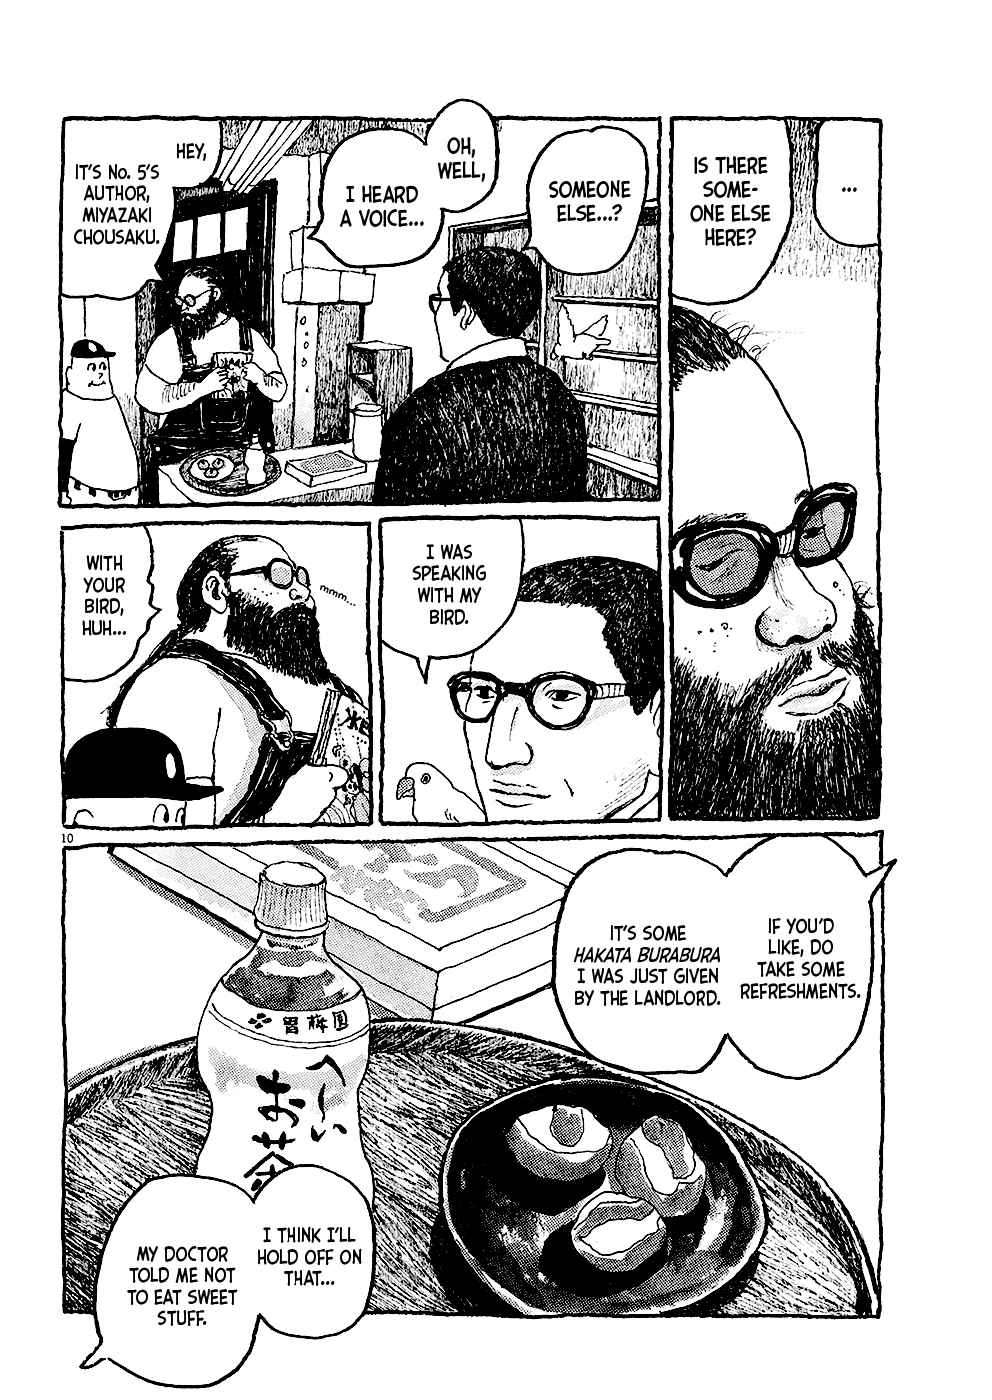 Tokyo Higoro Ch. 4 Today, I contact a used bookstore, and part ways with my manga.